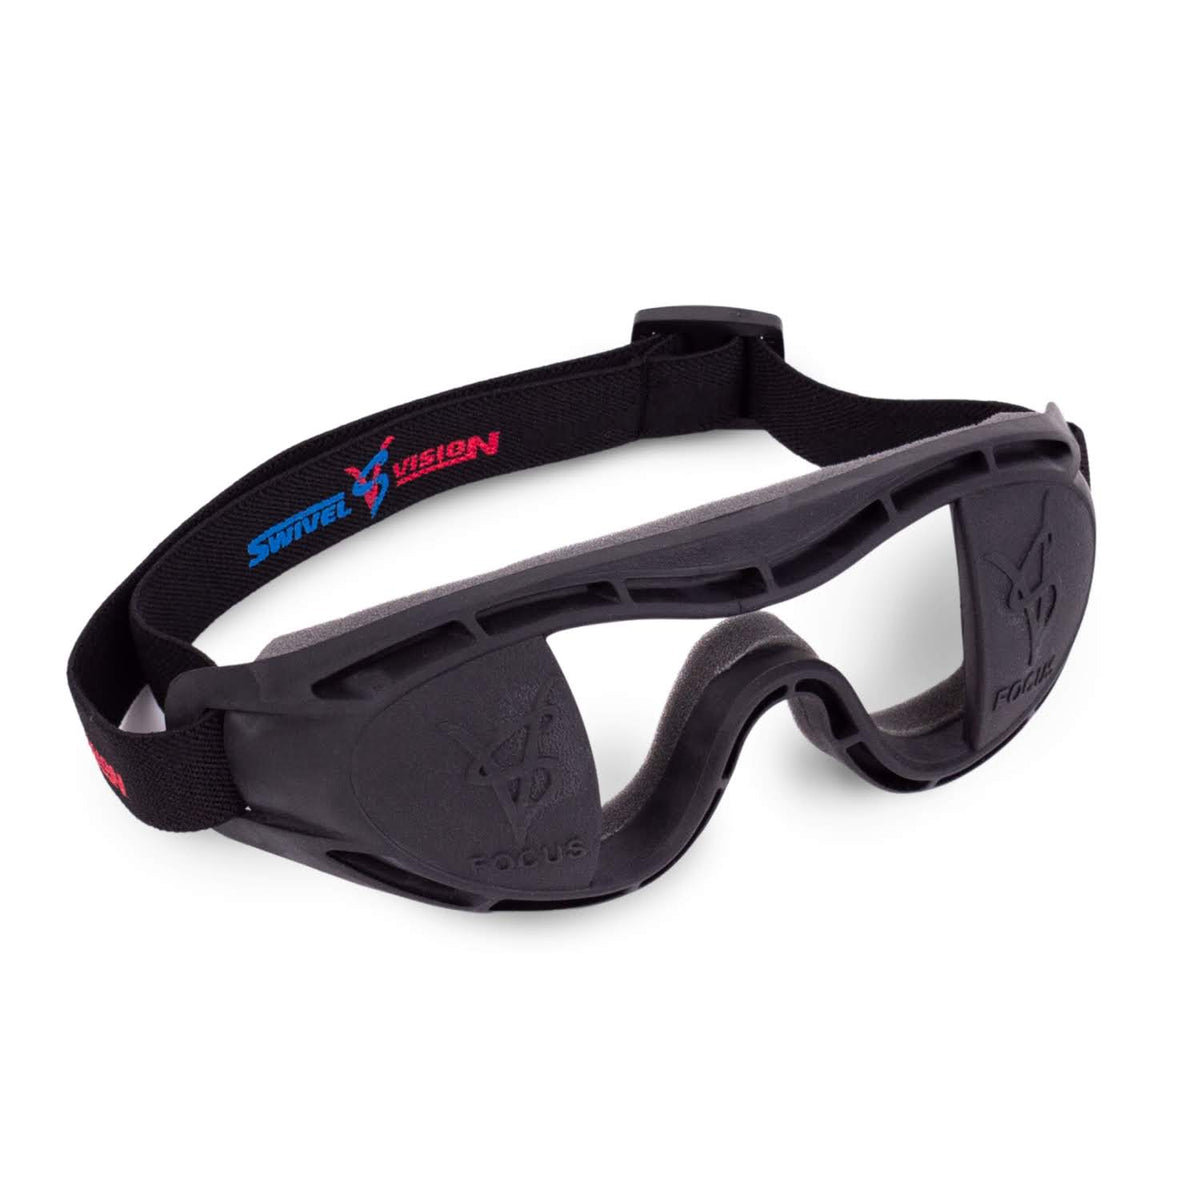 Professional Vision Training Goggles  |  One Size Fits All